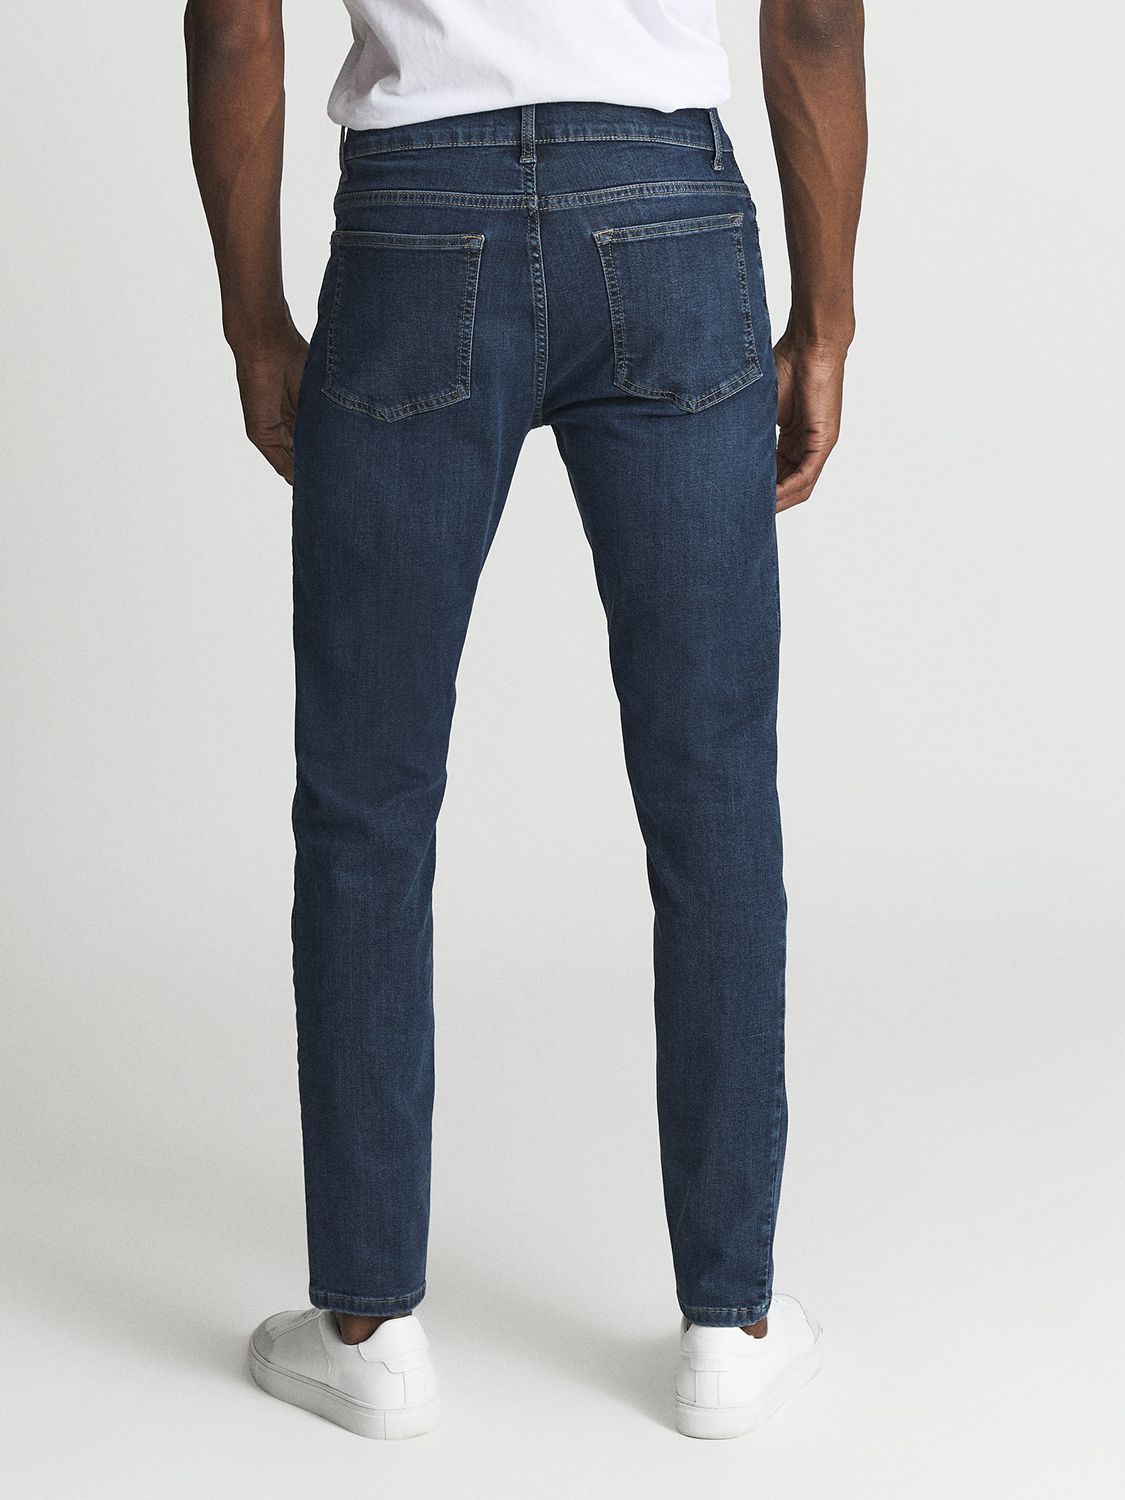 Reiss James Jersey Slim Fit Jeans at John Lewis & Partners